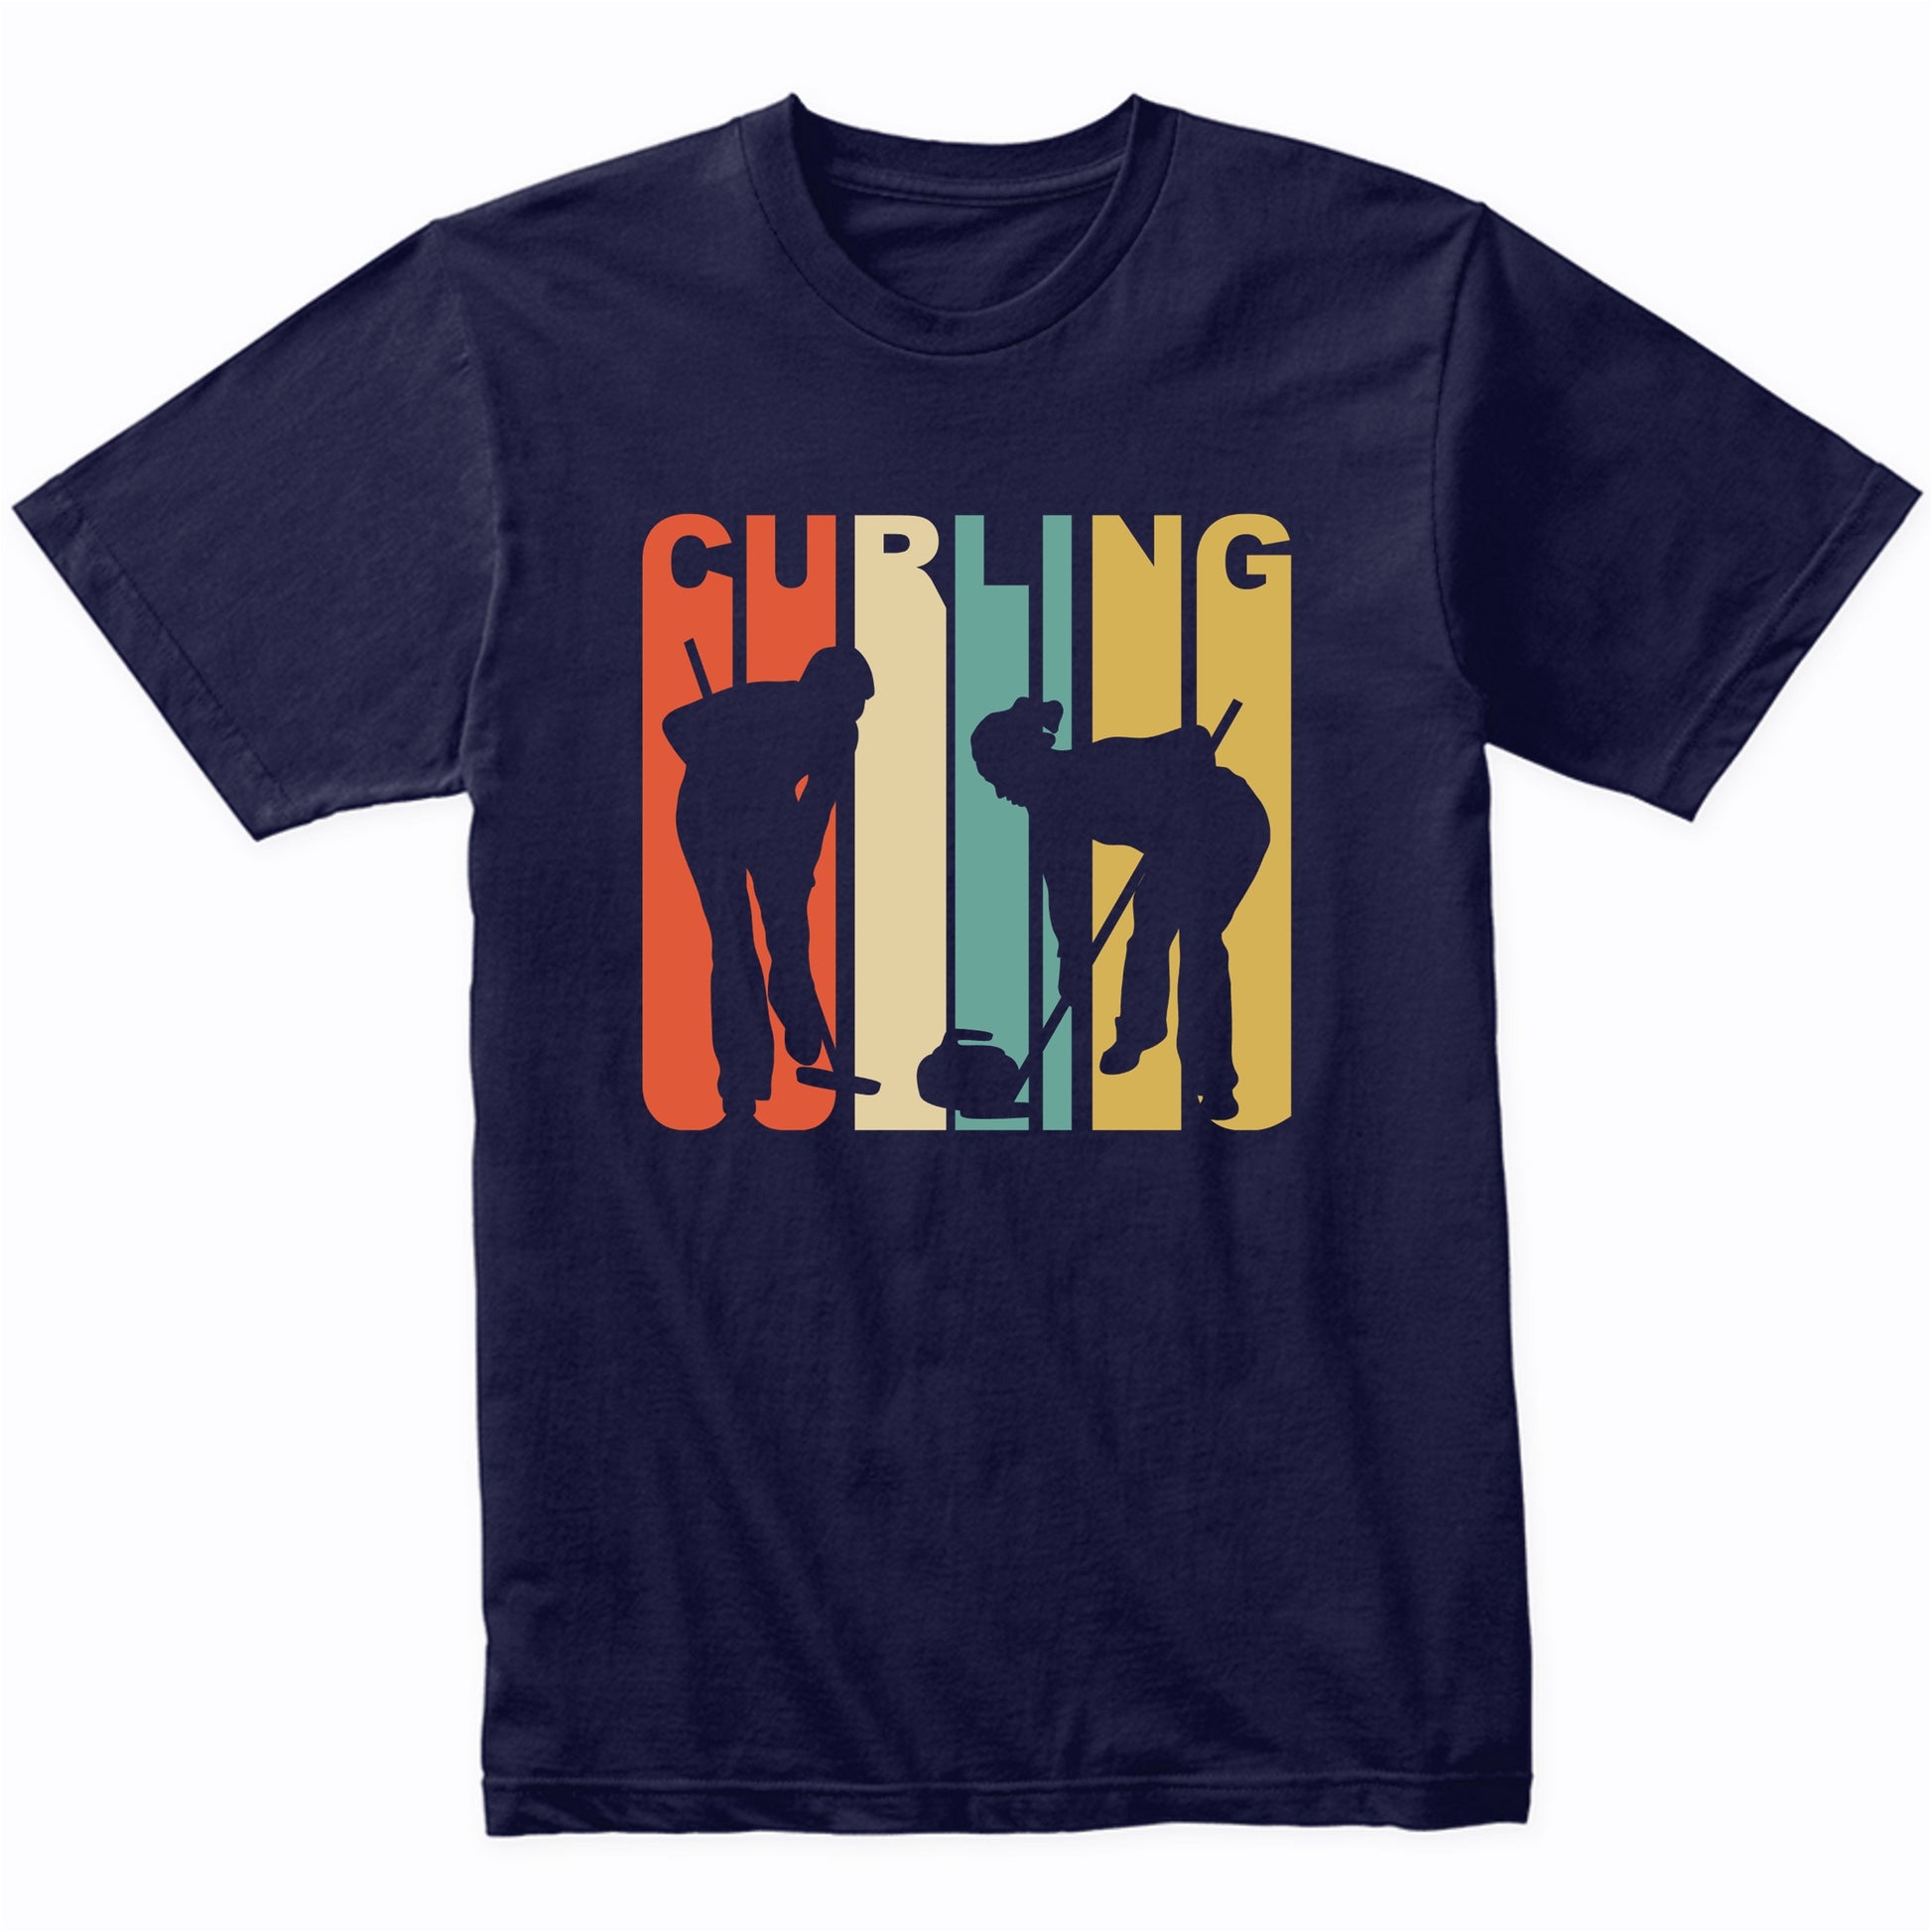 Retro 1970's Style Curlers Silhouette Curling T-Shirt